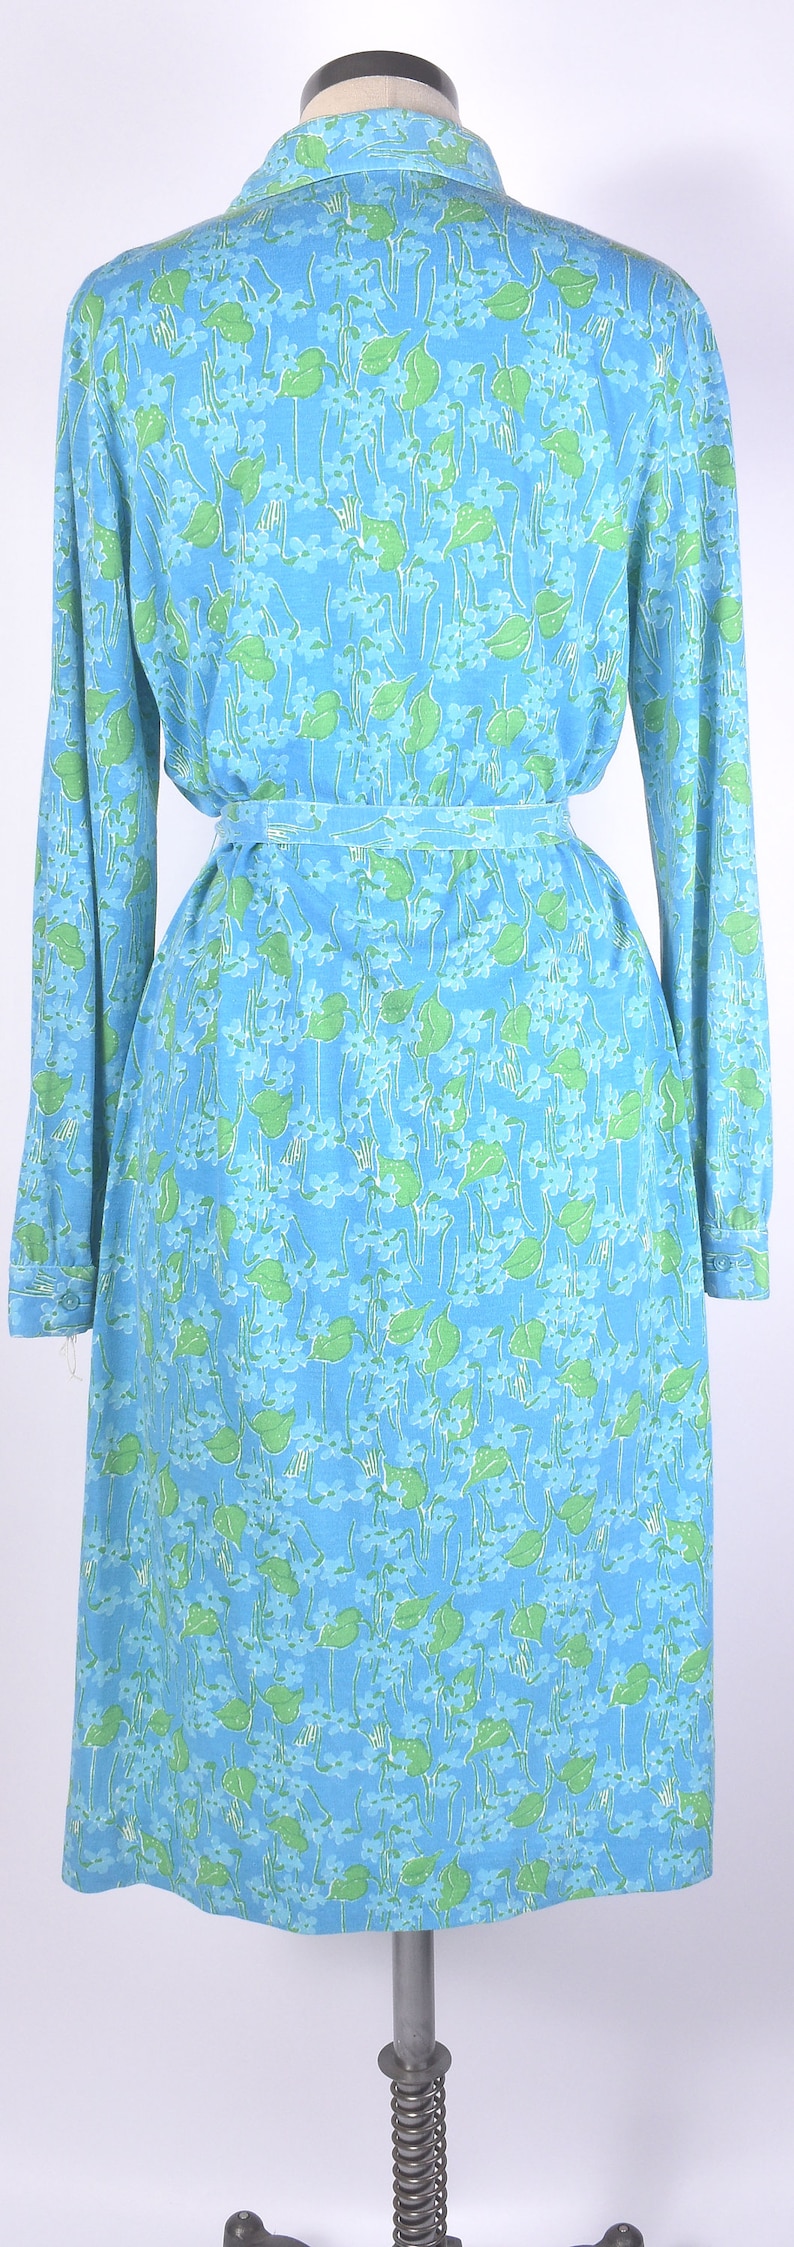 Vintage 70s Dress 70s Lilly Pulitzer Dress 70s Shirtwaist Dress Vintage Lilly Pulitzer 70s Floral Dress Large Lilly Pulitzer VFG image 9